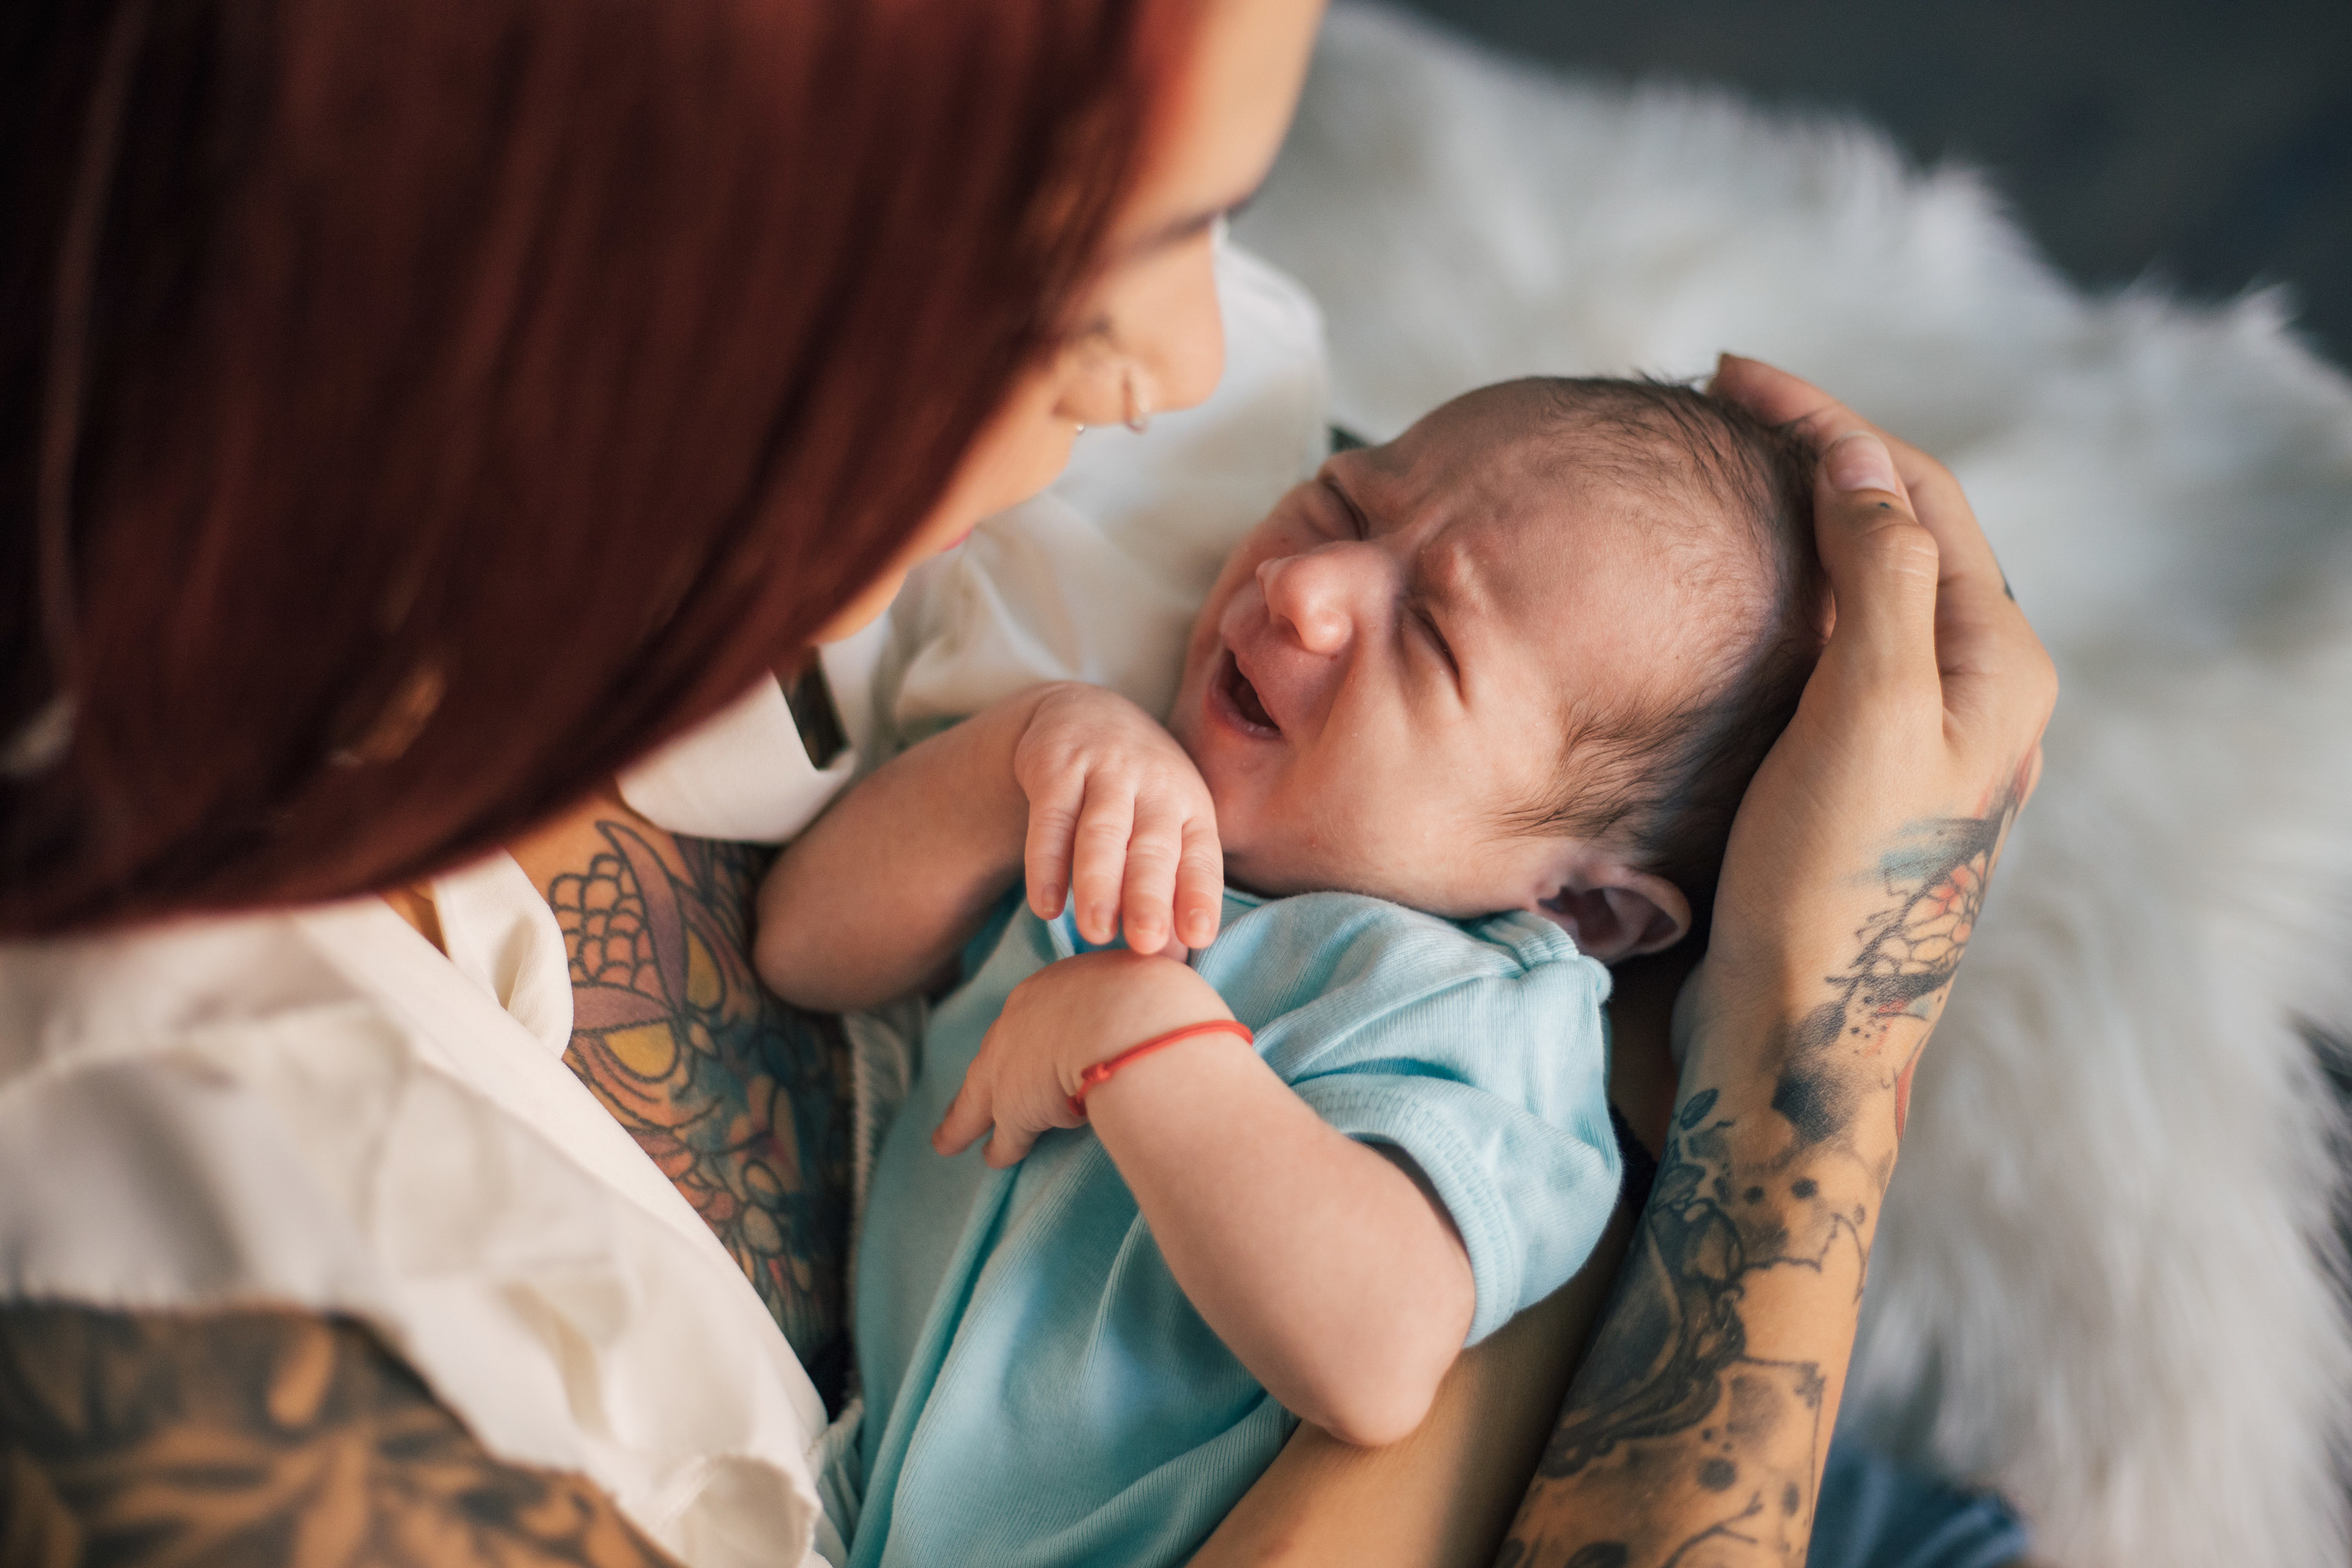 Tattooed woman holding a newborn close to her chest